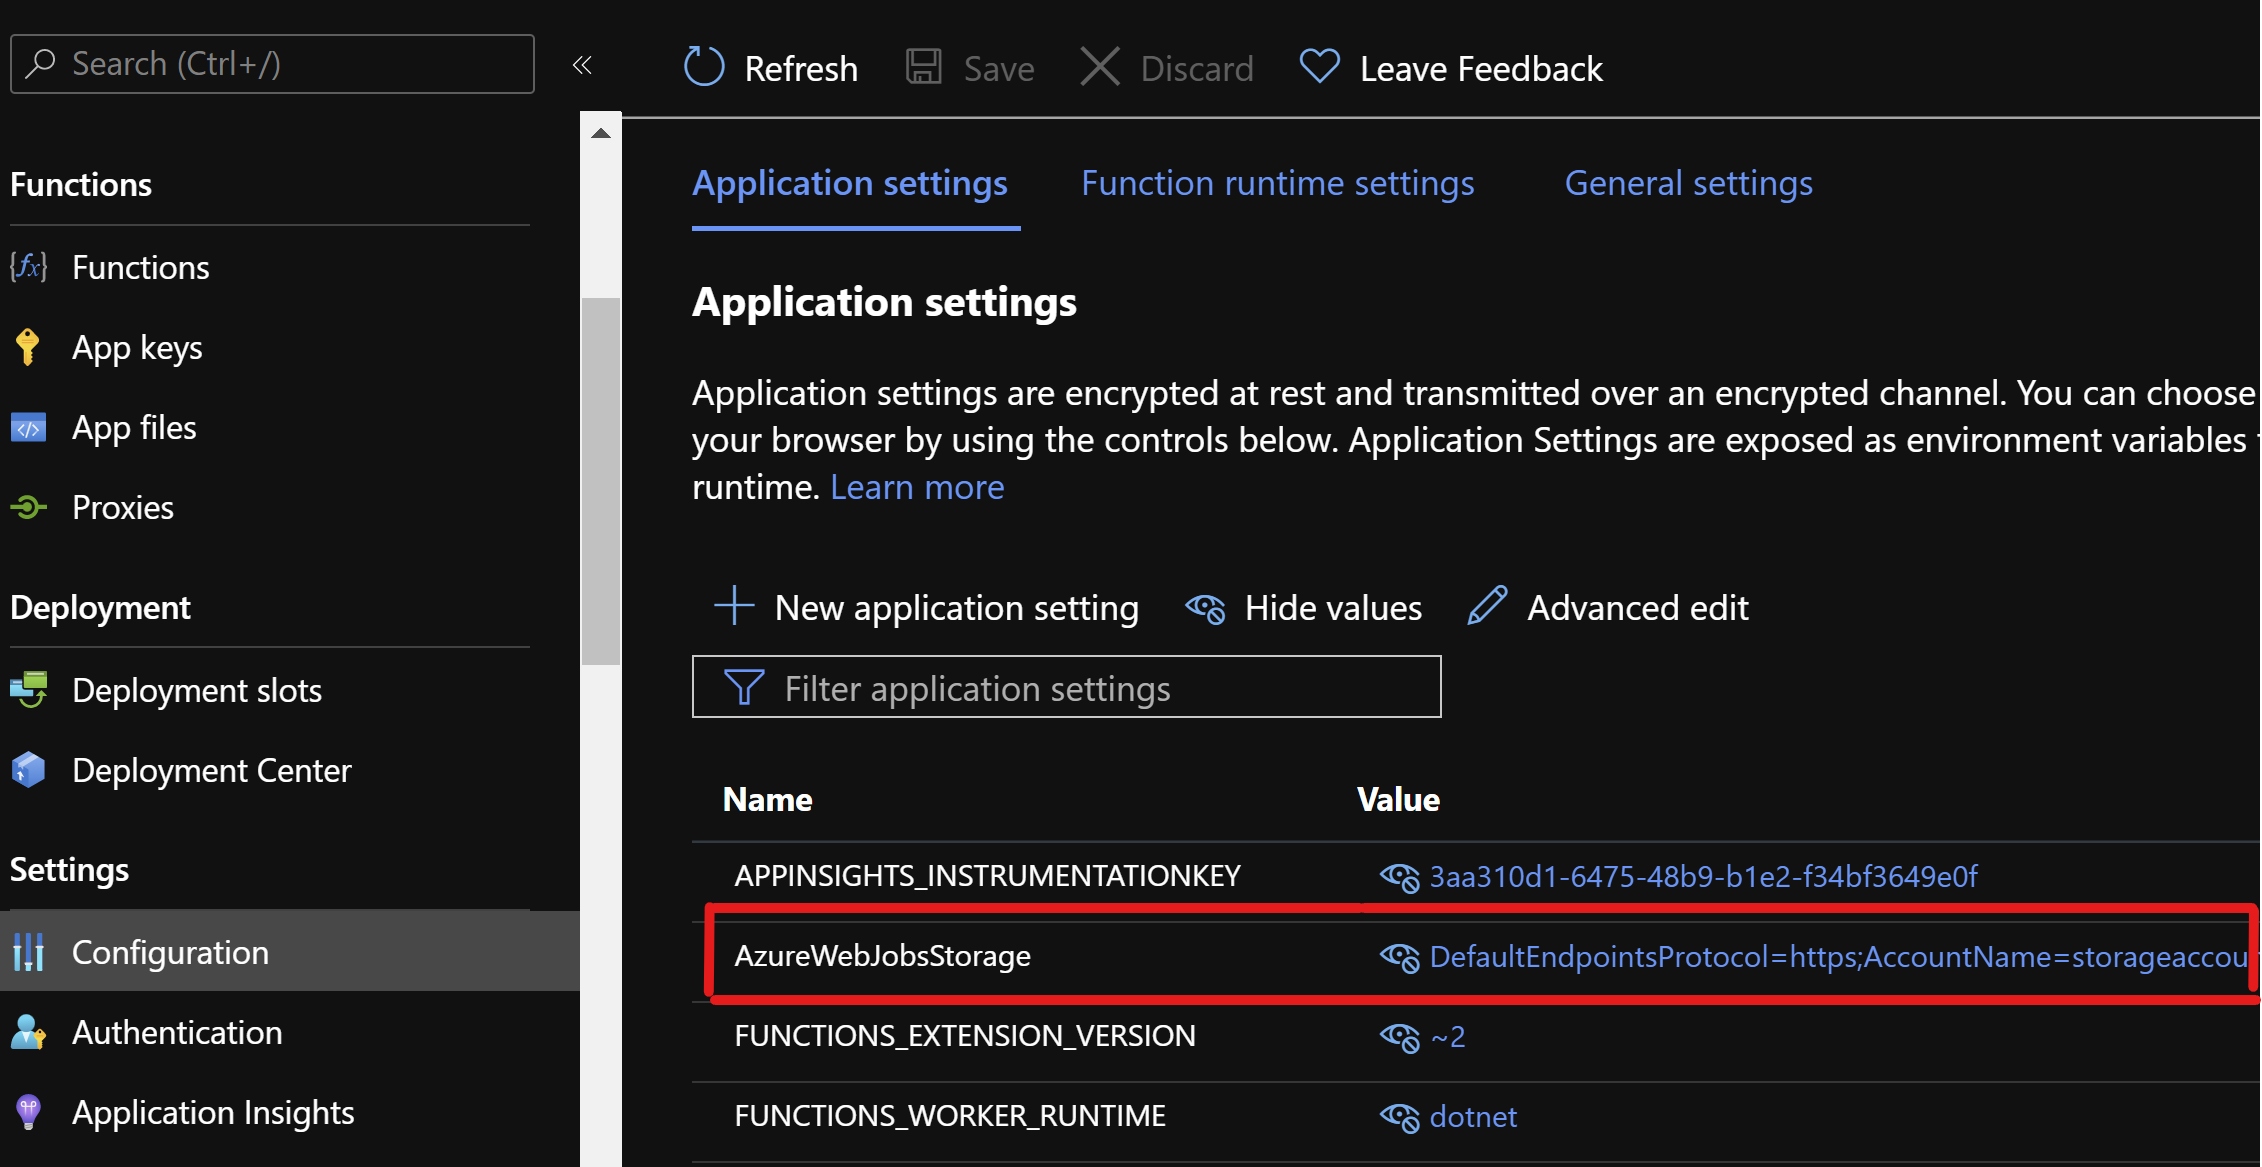 AzureWebJobsStorage setting with a secret value in Function App settings.